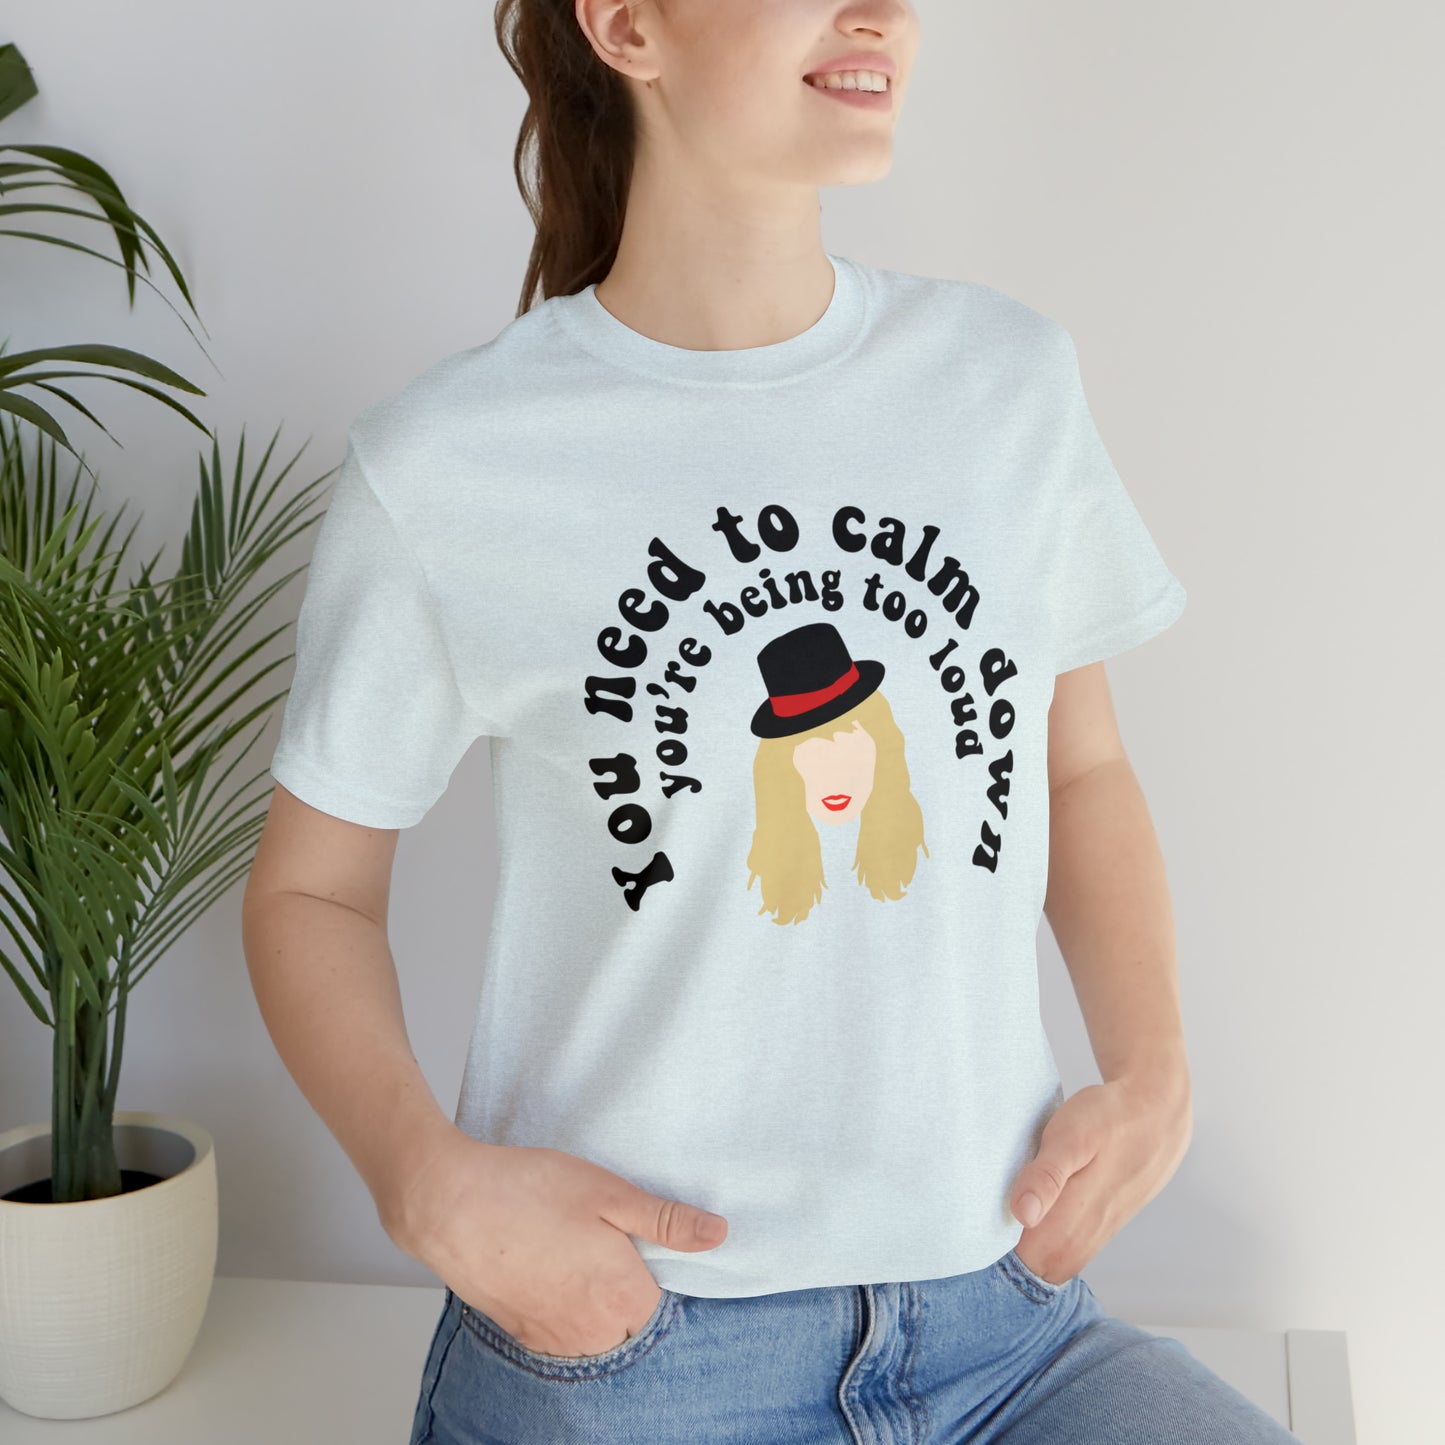 You Need to Calm Down Unisex Jersey Short Sleeve Tee